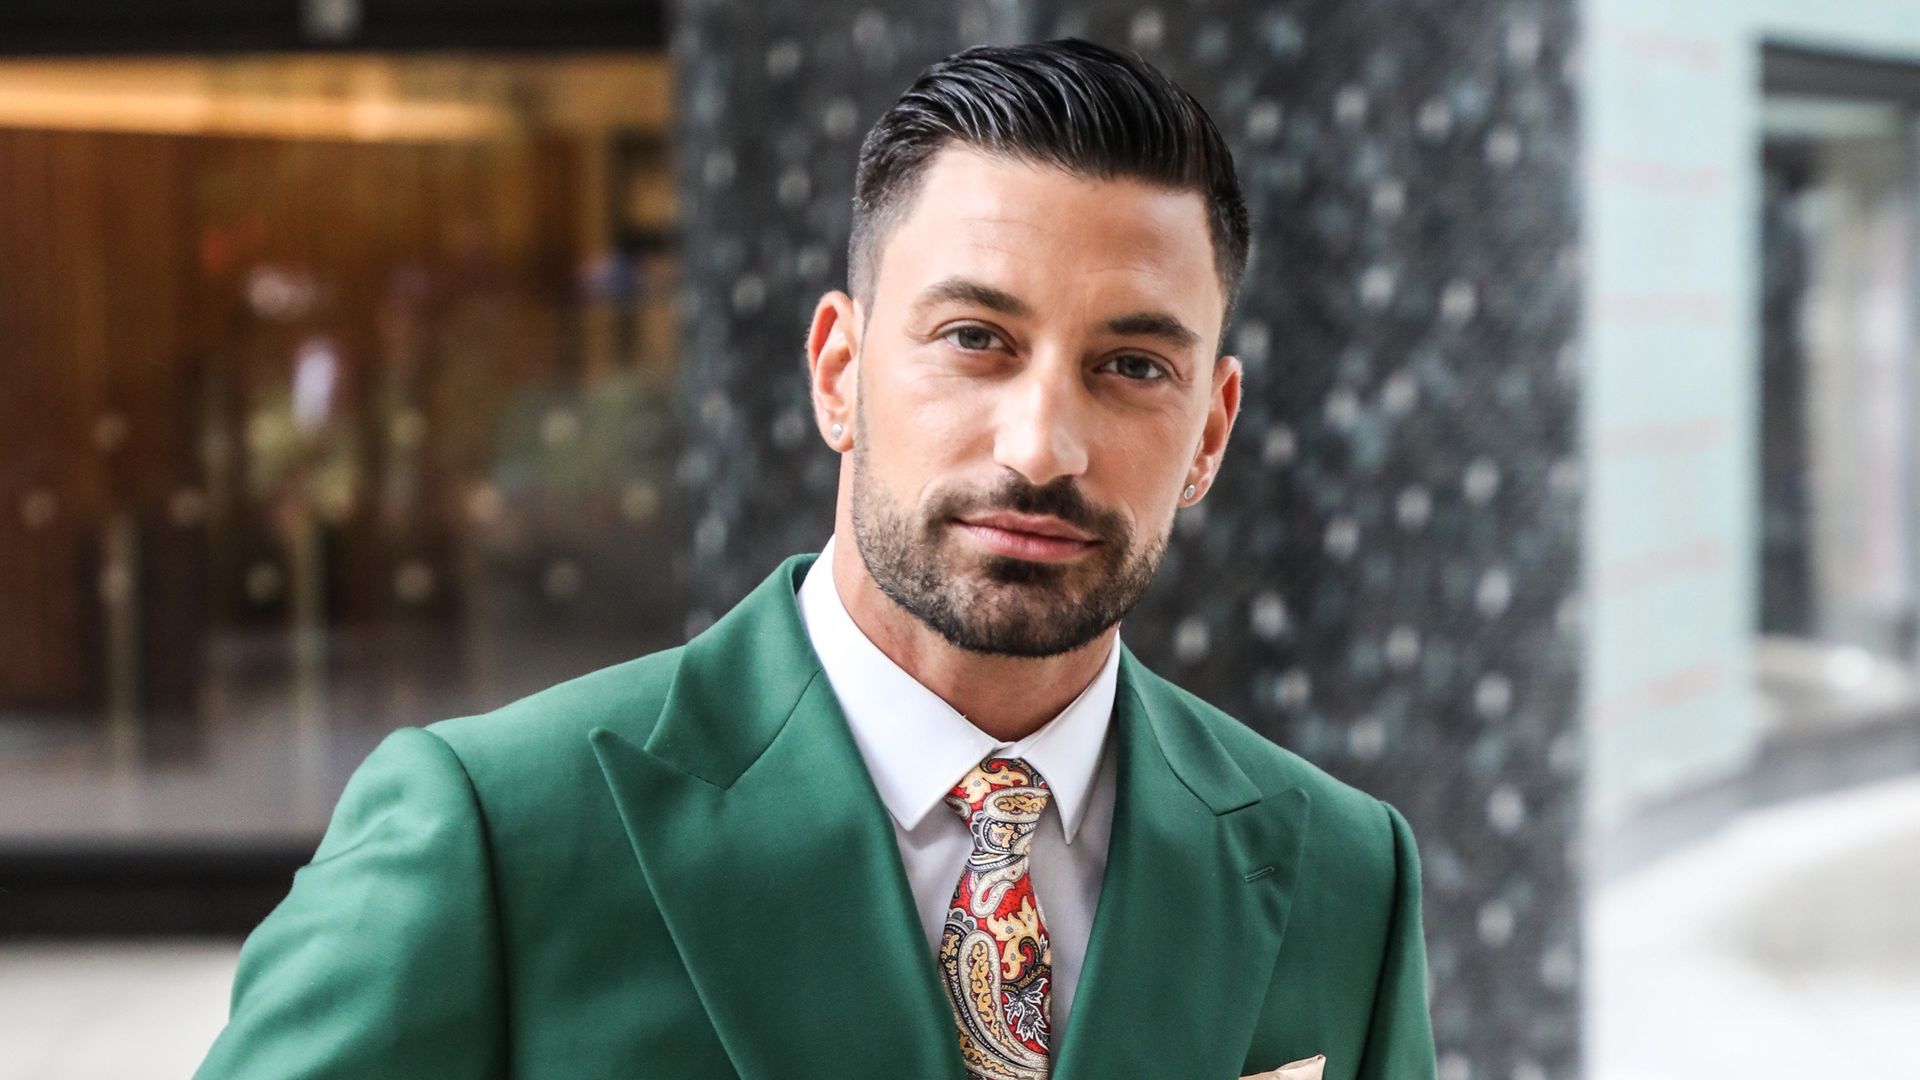 Giovanni Pernice in a green suit